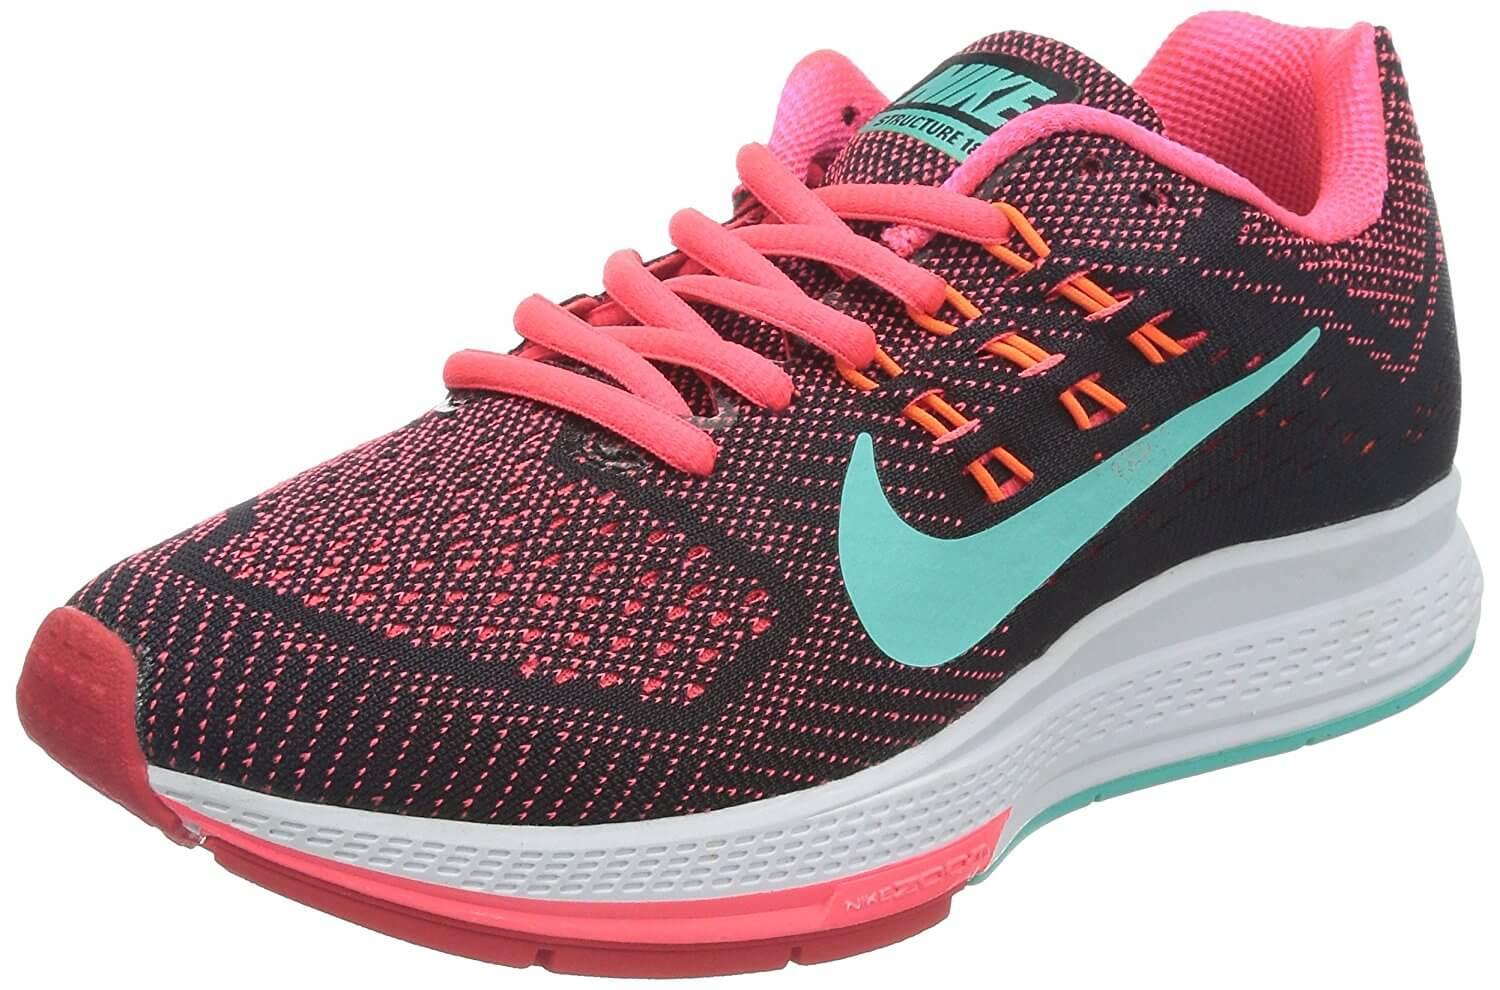 Nike Air Zoom Structure 18 Reviewed & Compared in